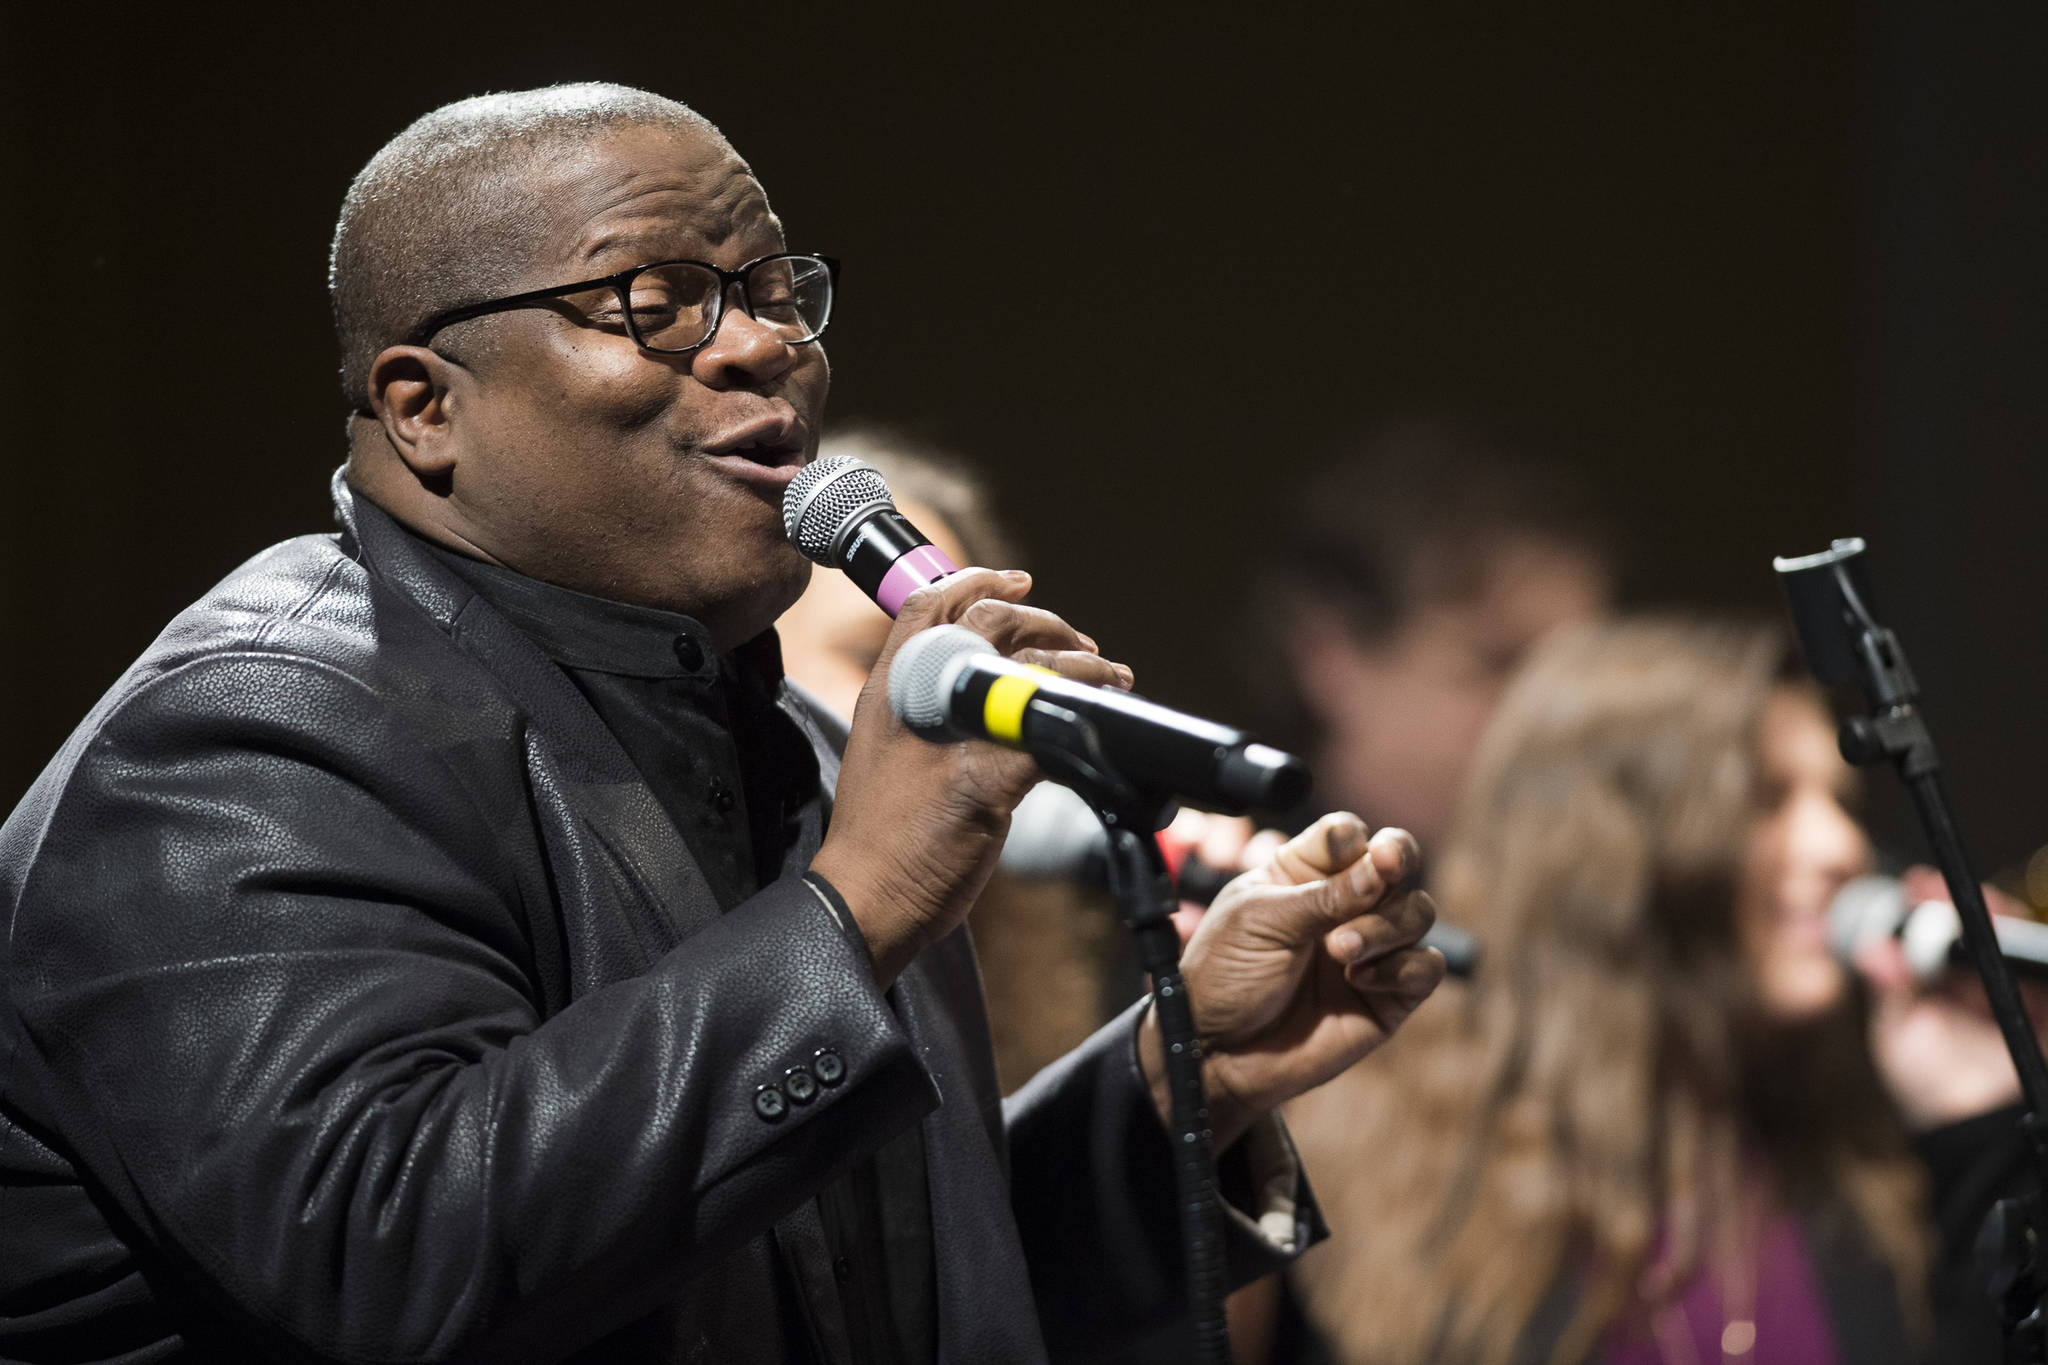 Bobby Lewis sings during the performance of “Motown for Our Town” at the Juneau Arts & Culture Center on Friday, March 1, 2019. (Michael Penn | Juneau Empire)